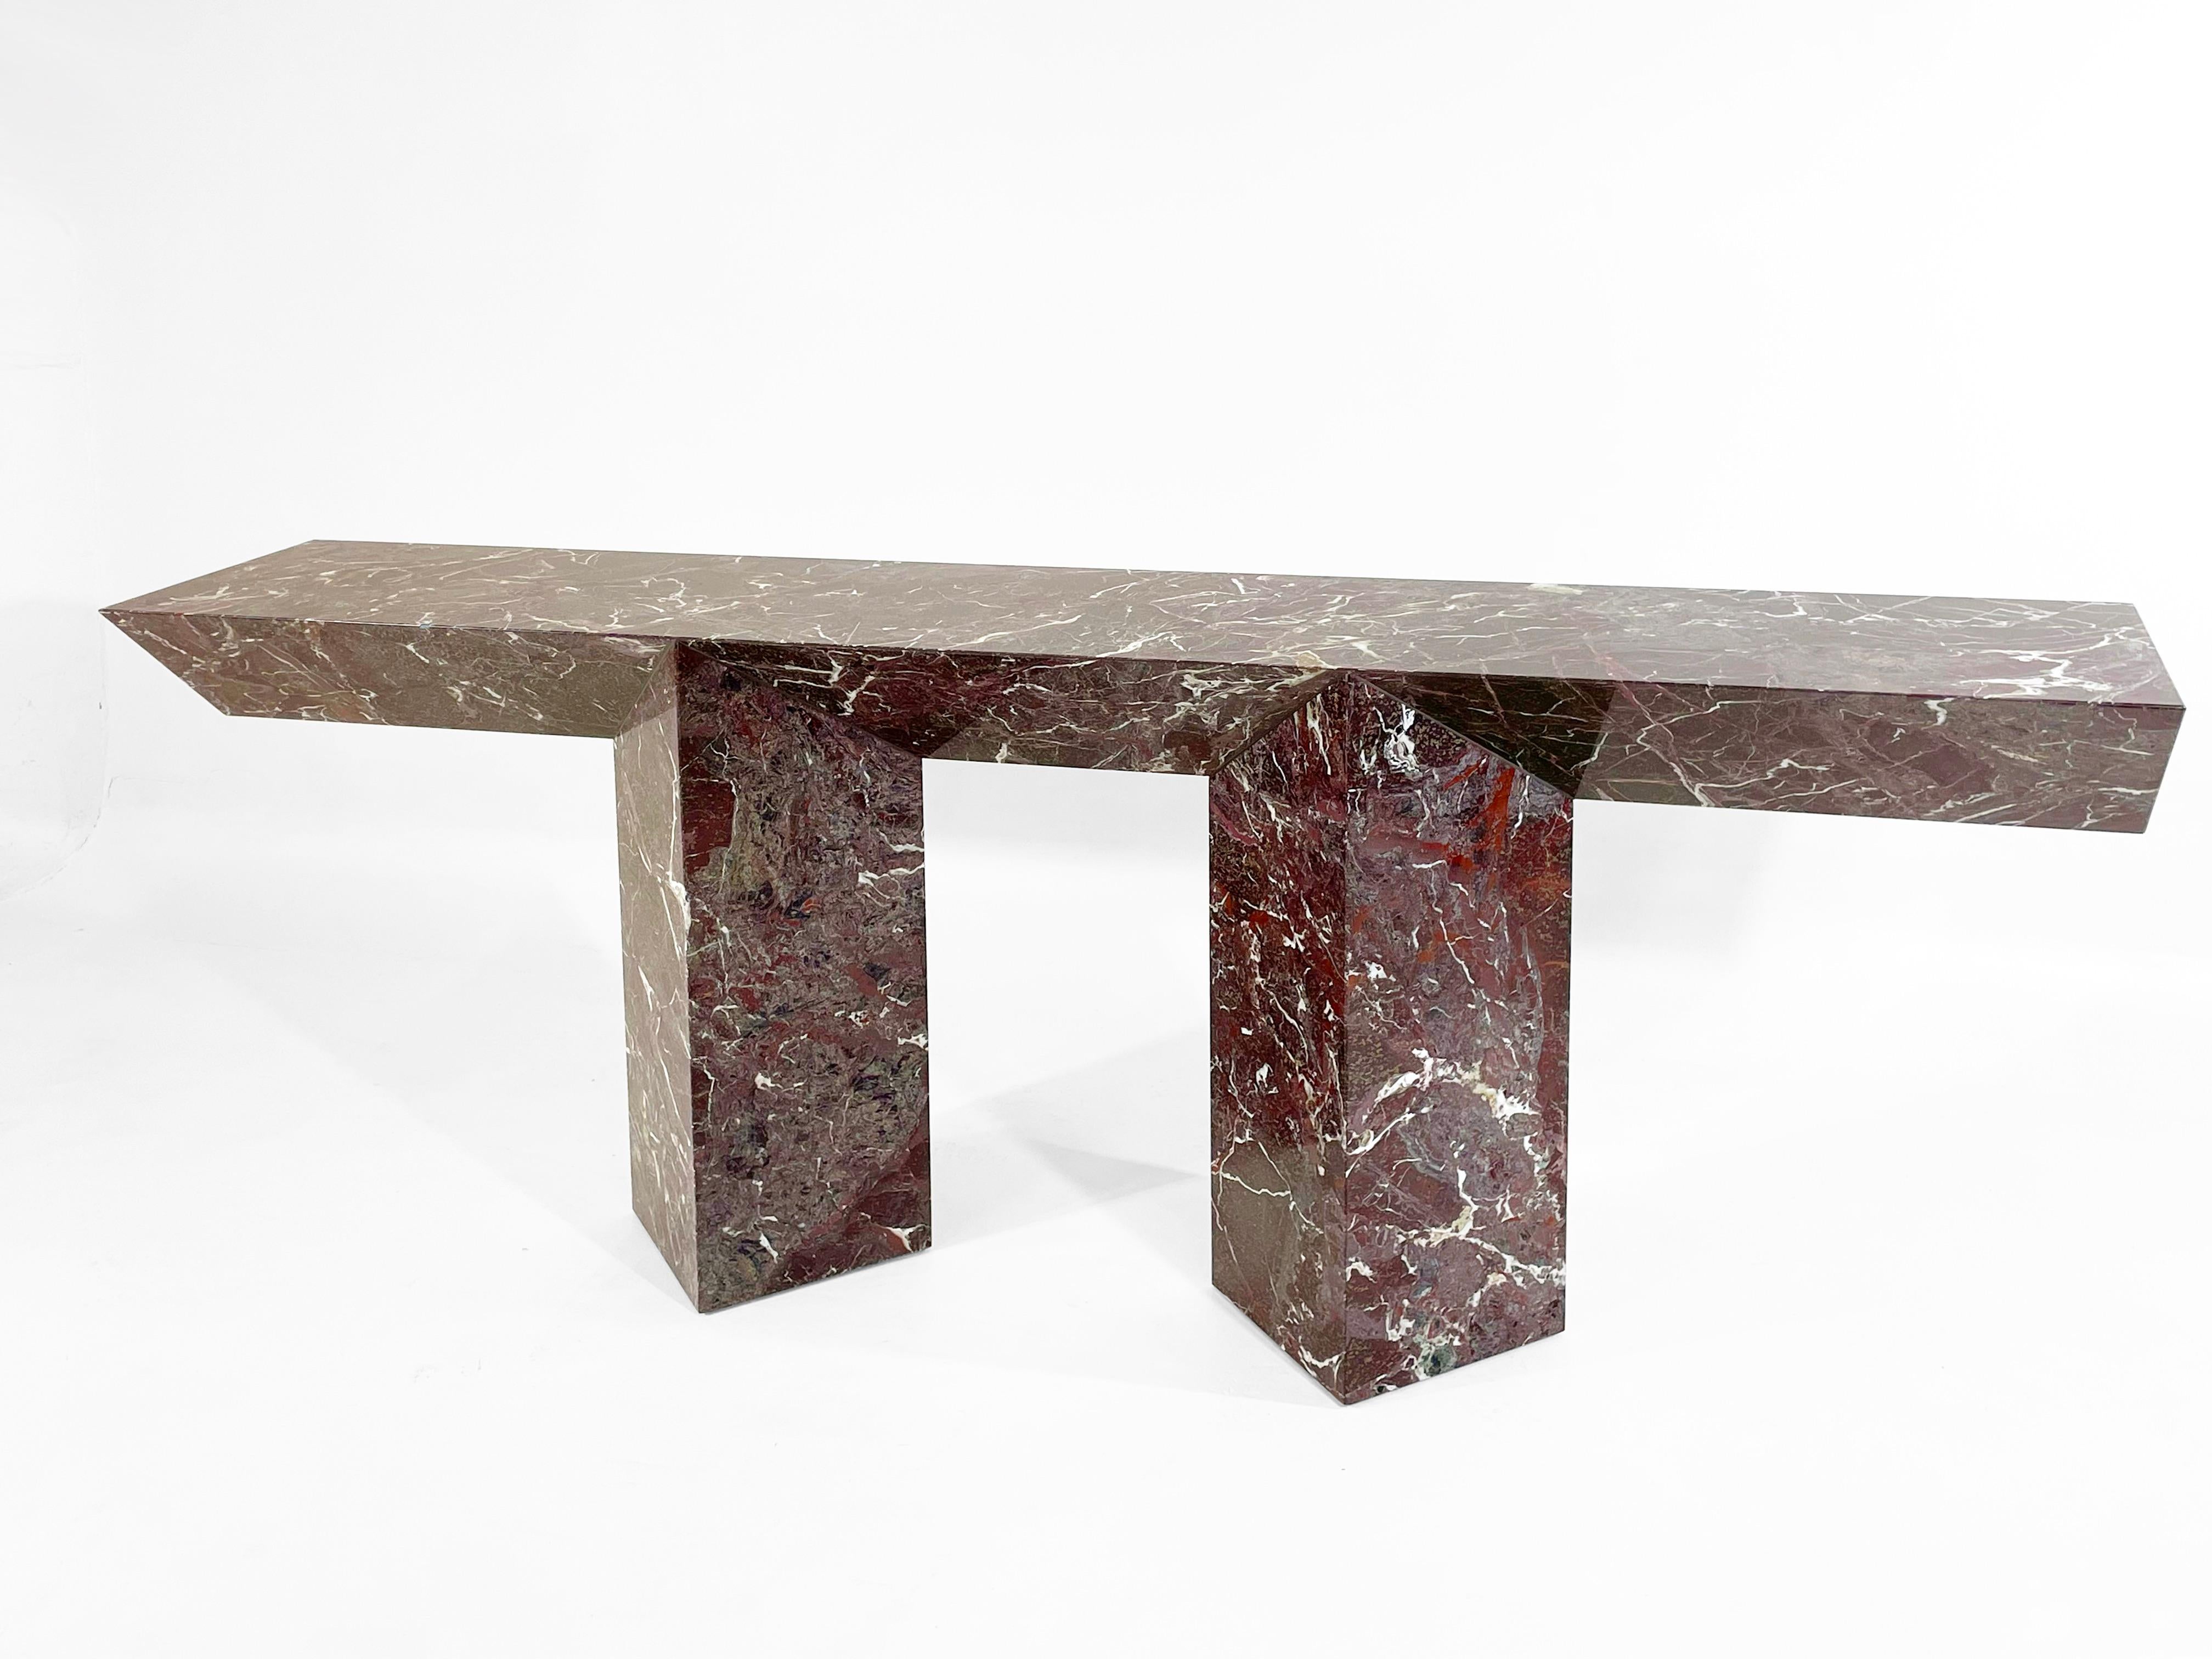 An all marble console that explores the sculptural possibilities of interconnecting triangles. Available in custom heights and lengths this console plays with symmetry and proportion to create a finished piece that feels balanced and grounded.